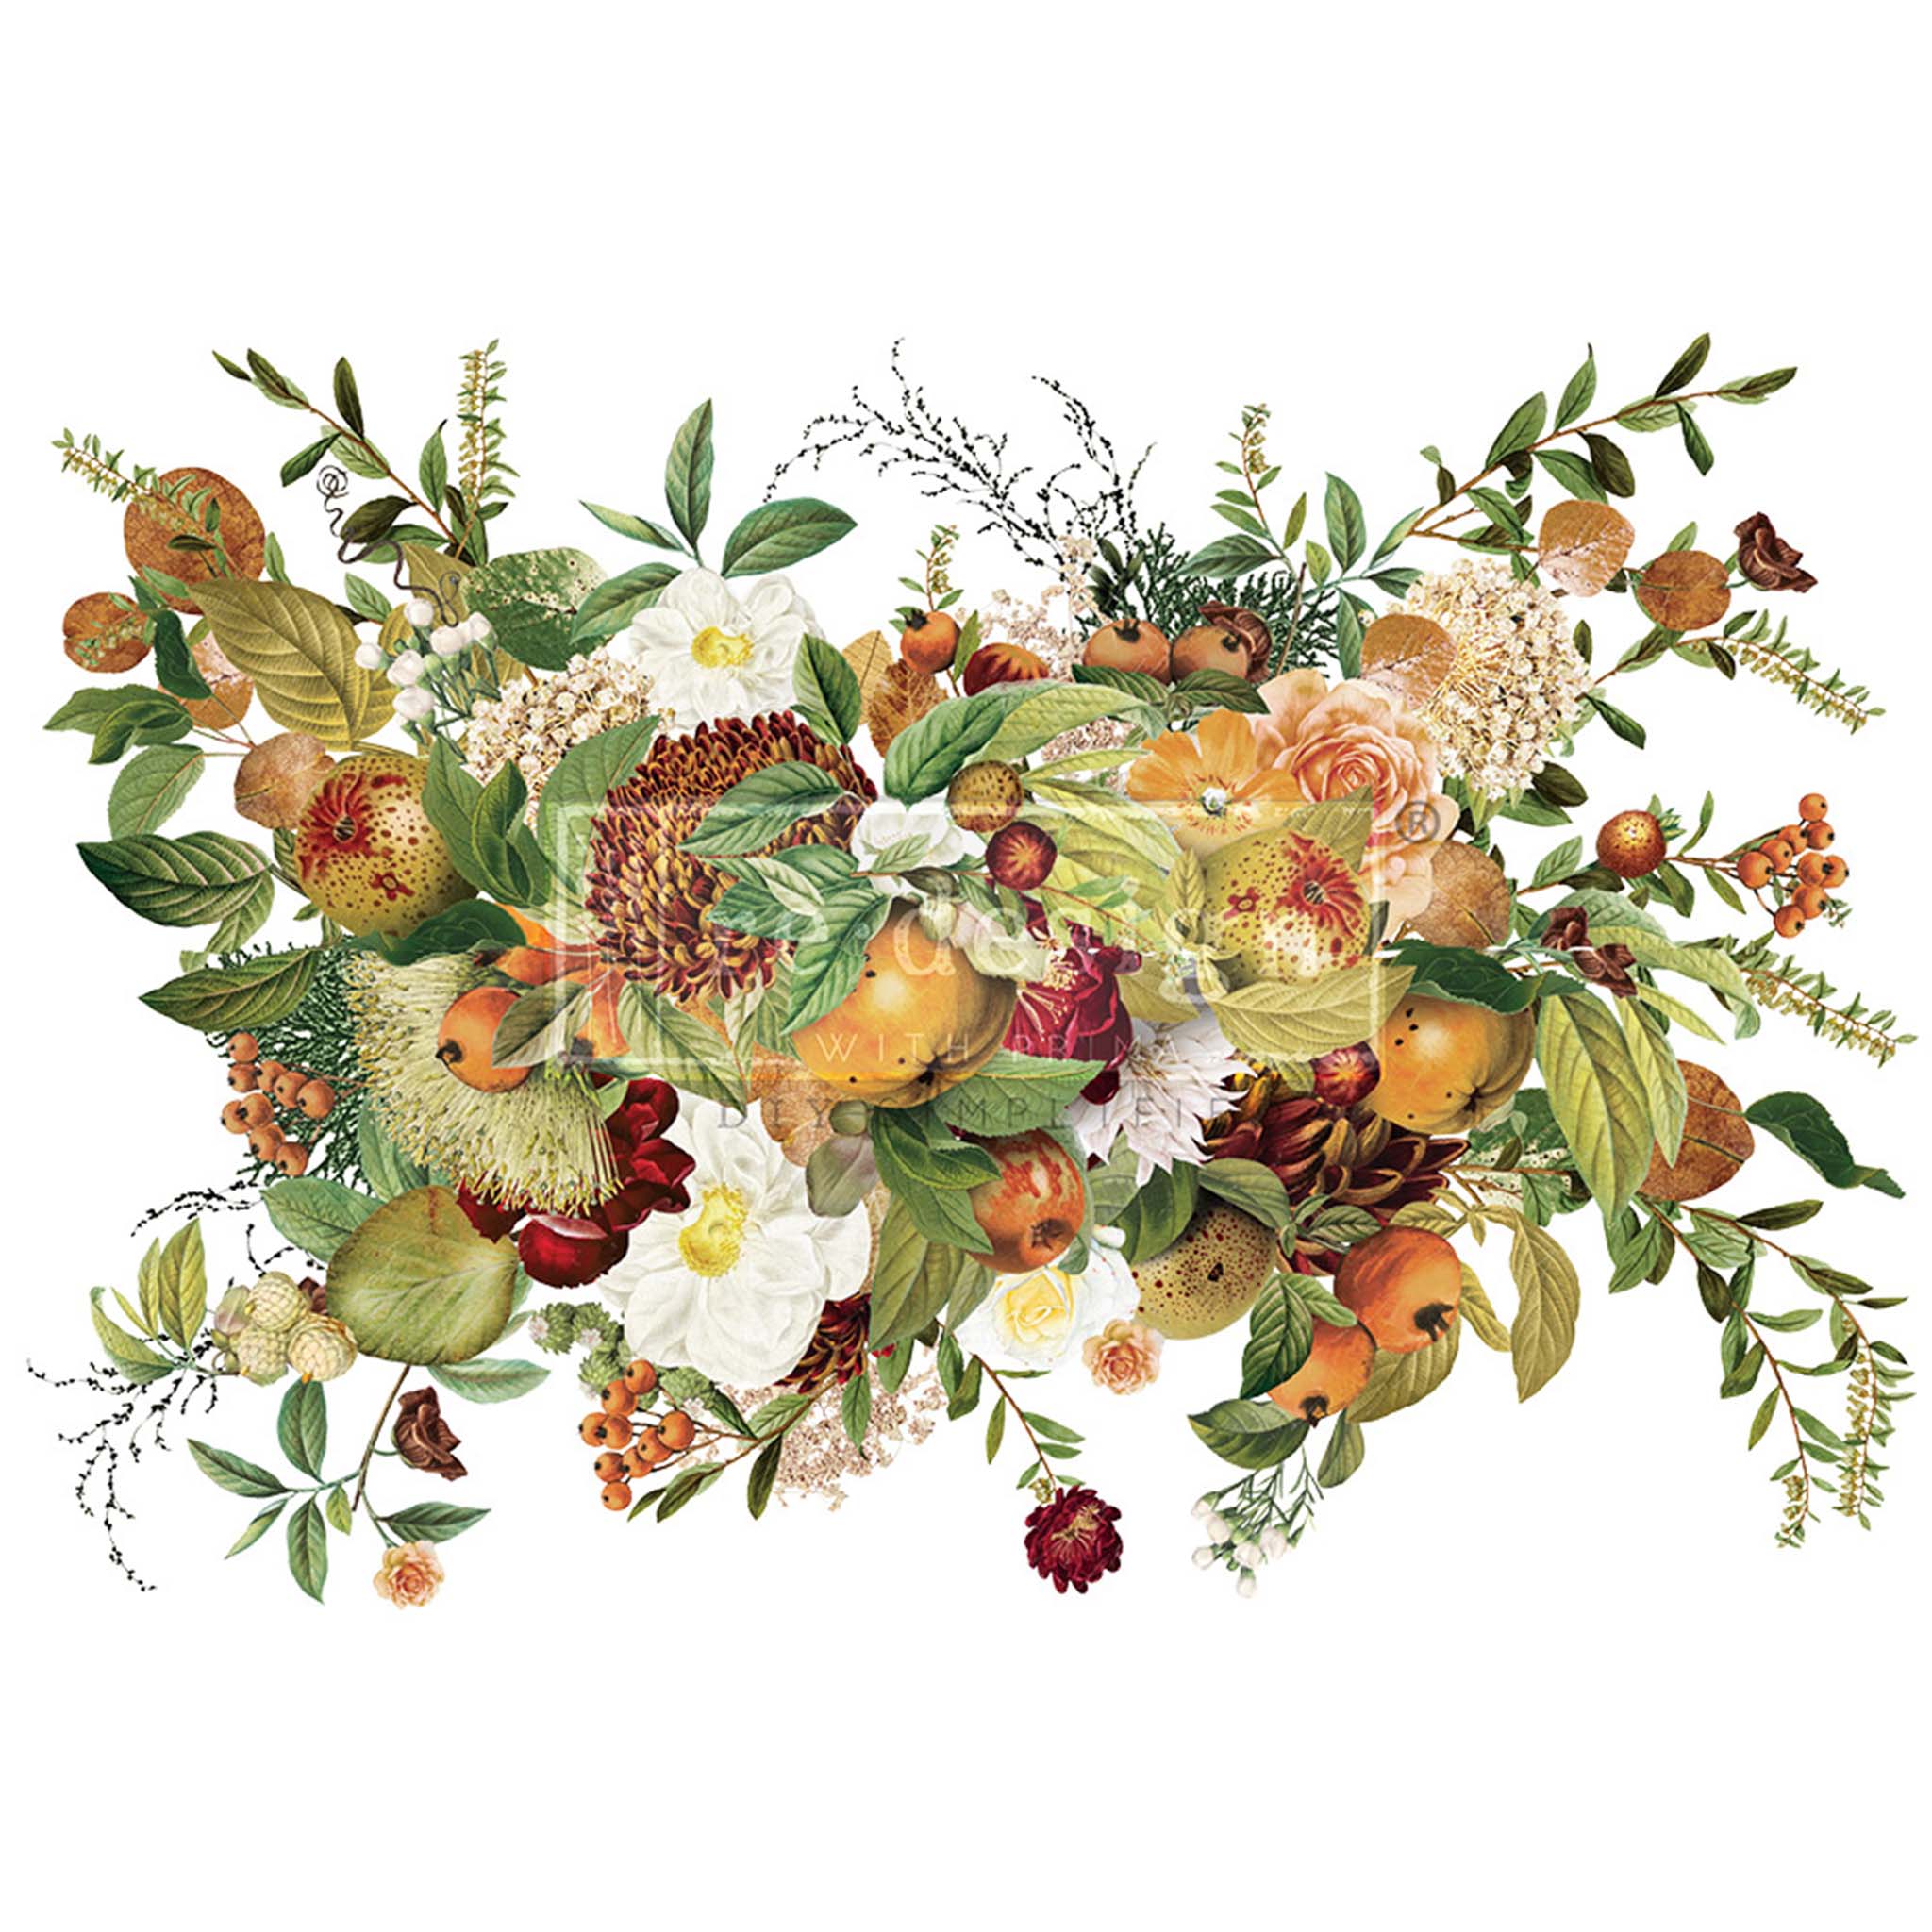 A rub-on transfer of an autumn bouquet in shades of rust, peach, and burgundy with a scattering of greenery is against a white background.